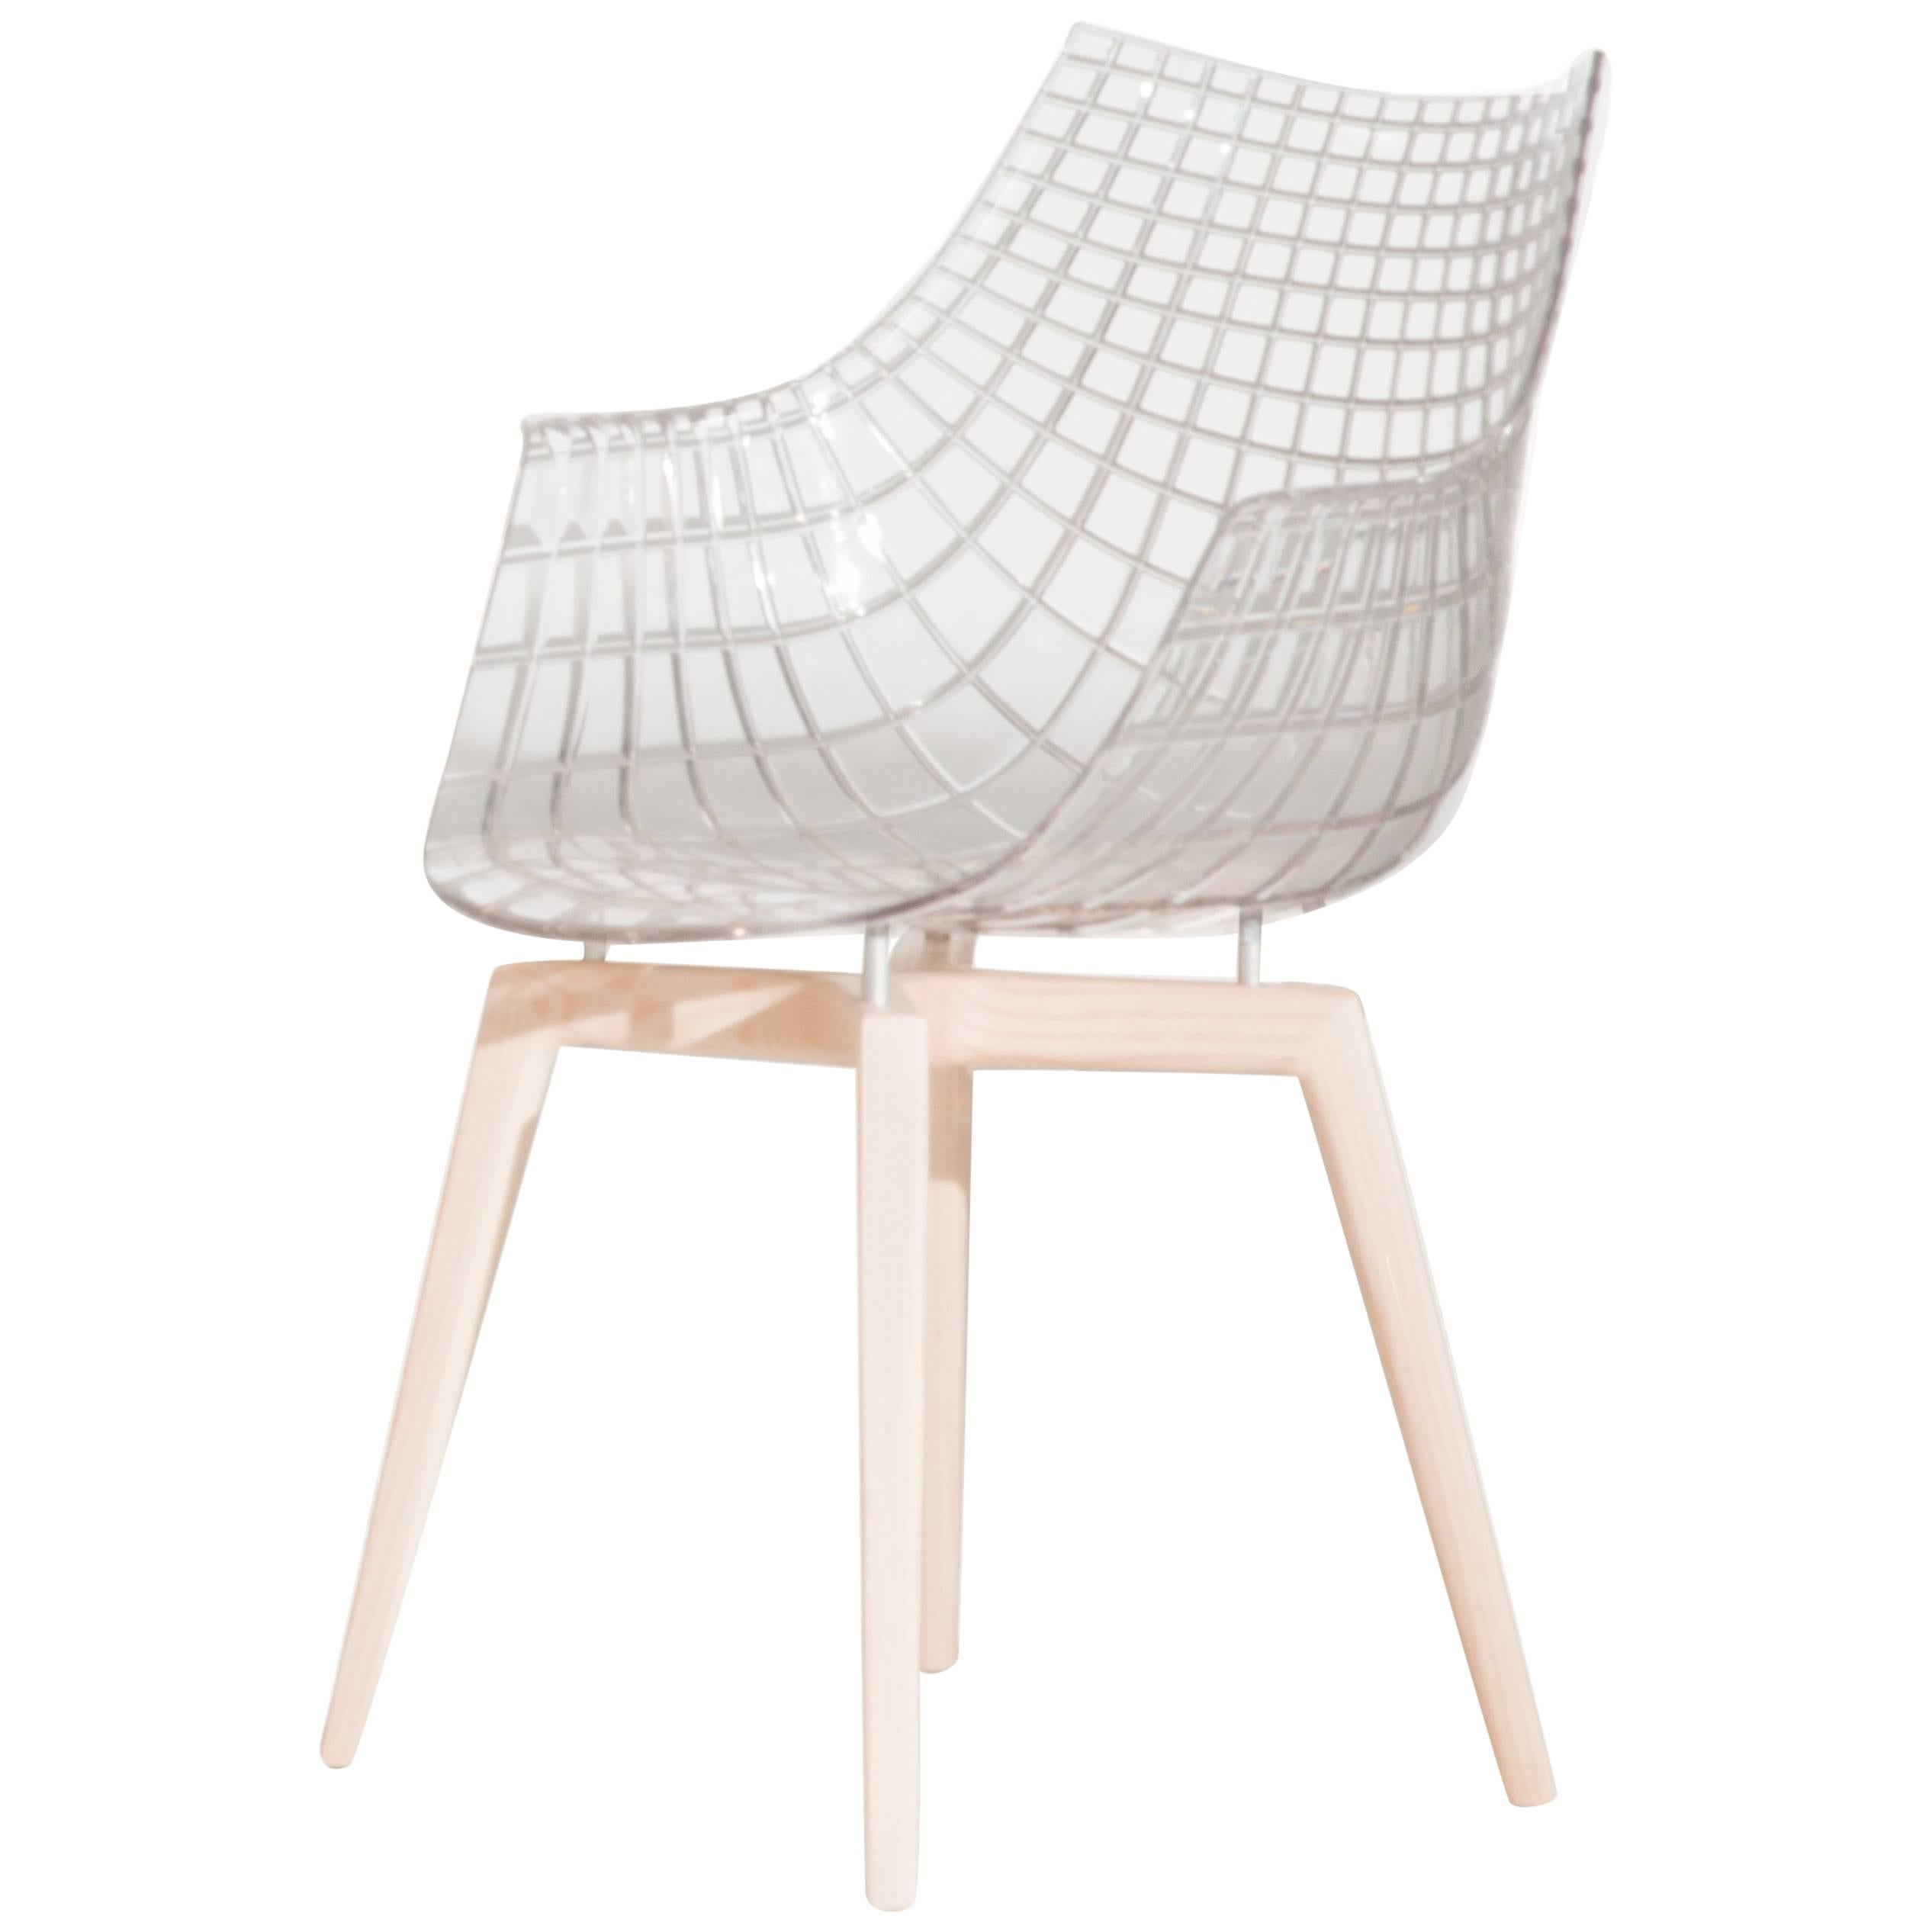 Meridiana Chair in Transparent by Christophe Pillet for Driade